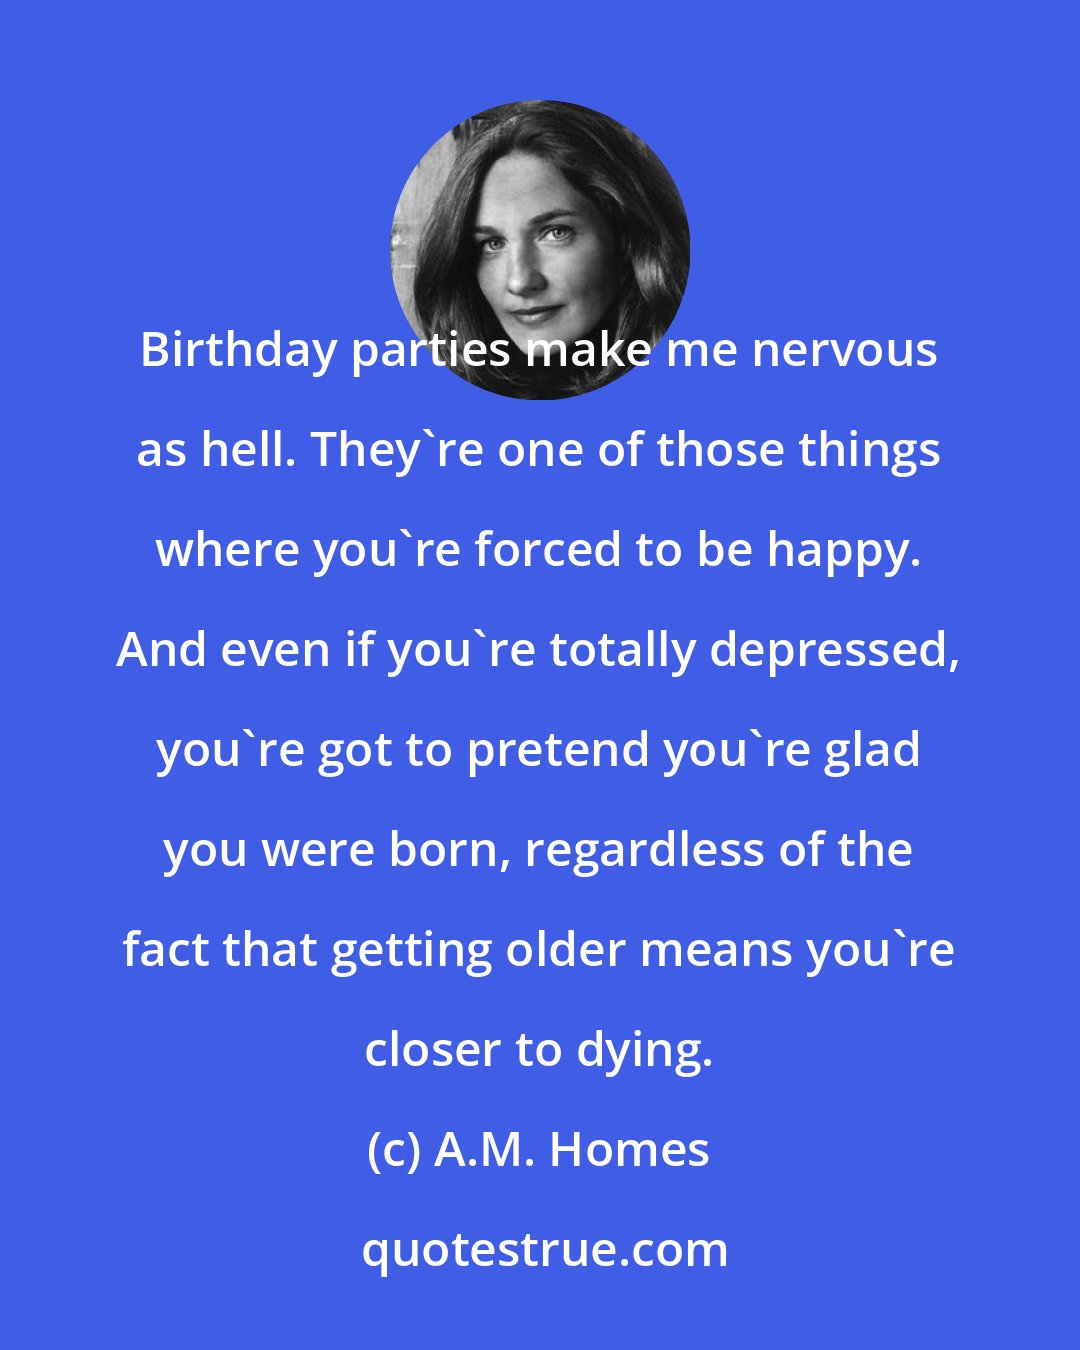 A.M. Homes: Birthday parties make me nervous as hell. They're one of those things where you're forced to be happy. And even if you're totally depressed, you're got to pretend you're glad you were born, regardless of the fact that getting older means you're closer to dying.